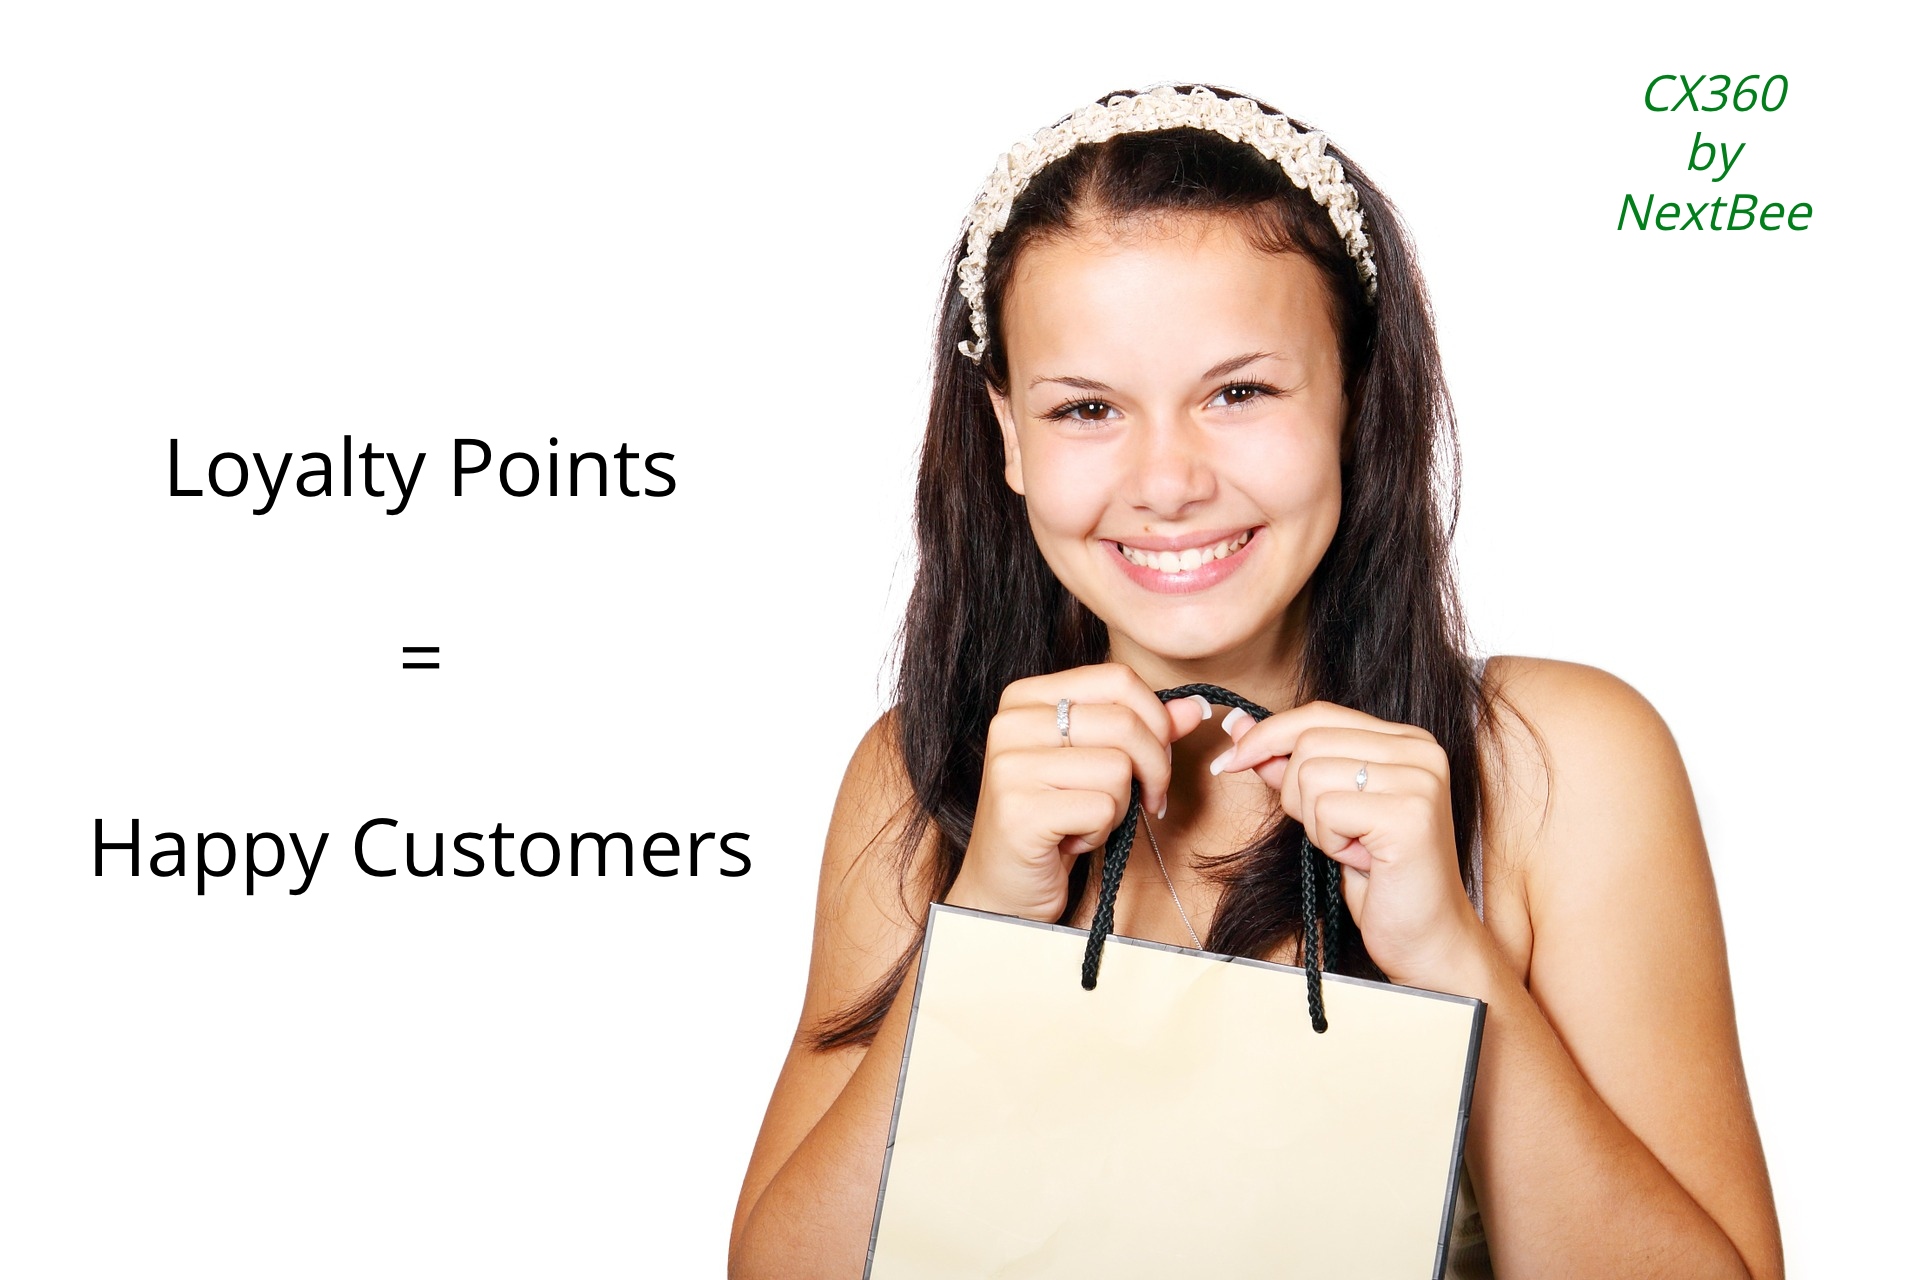 Customer Loyalty Points Platform Boosts Loyalty with a Points-Based System